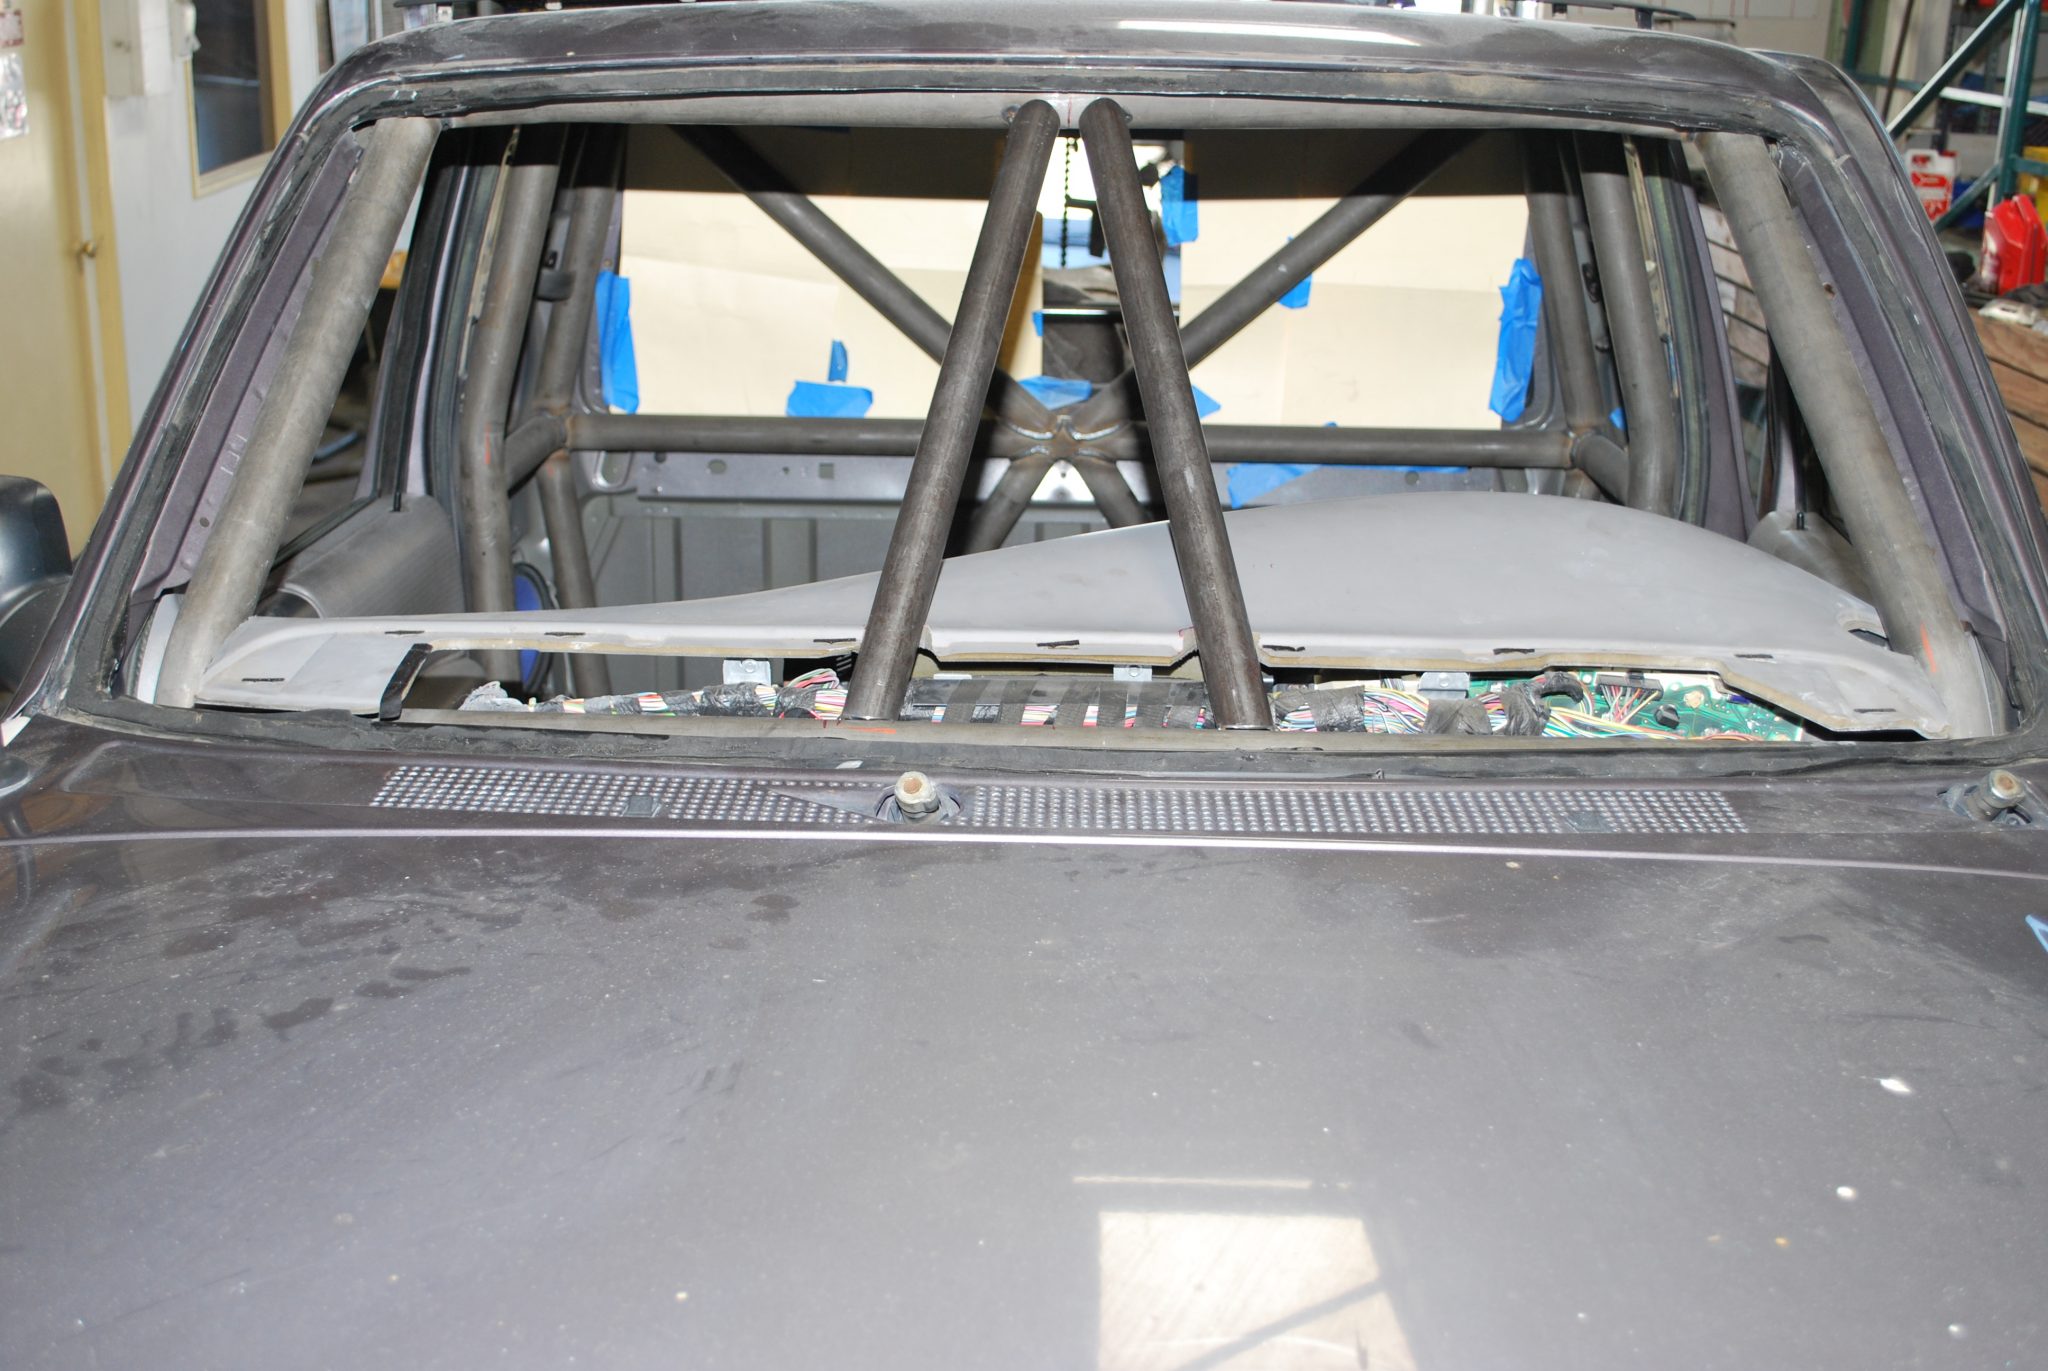 1997 Ford ranger roll cage #1